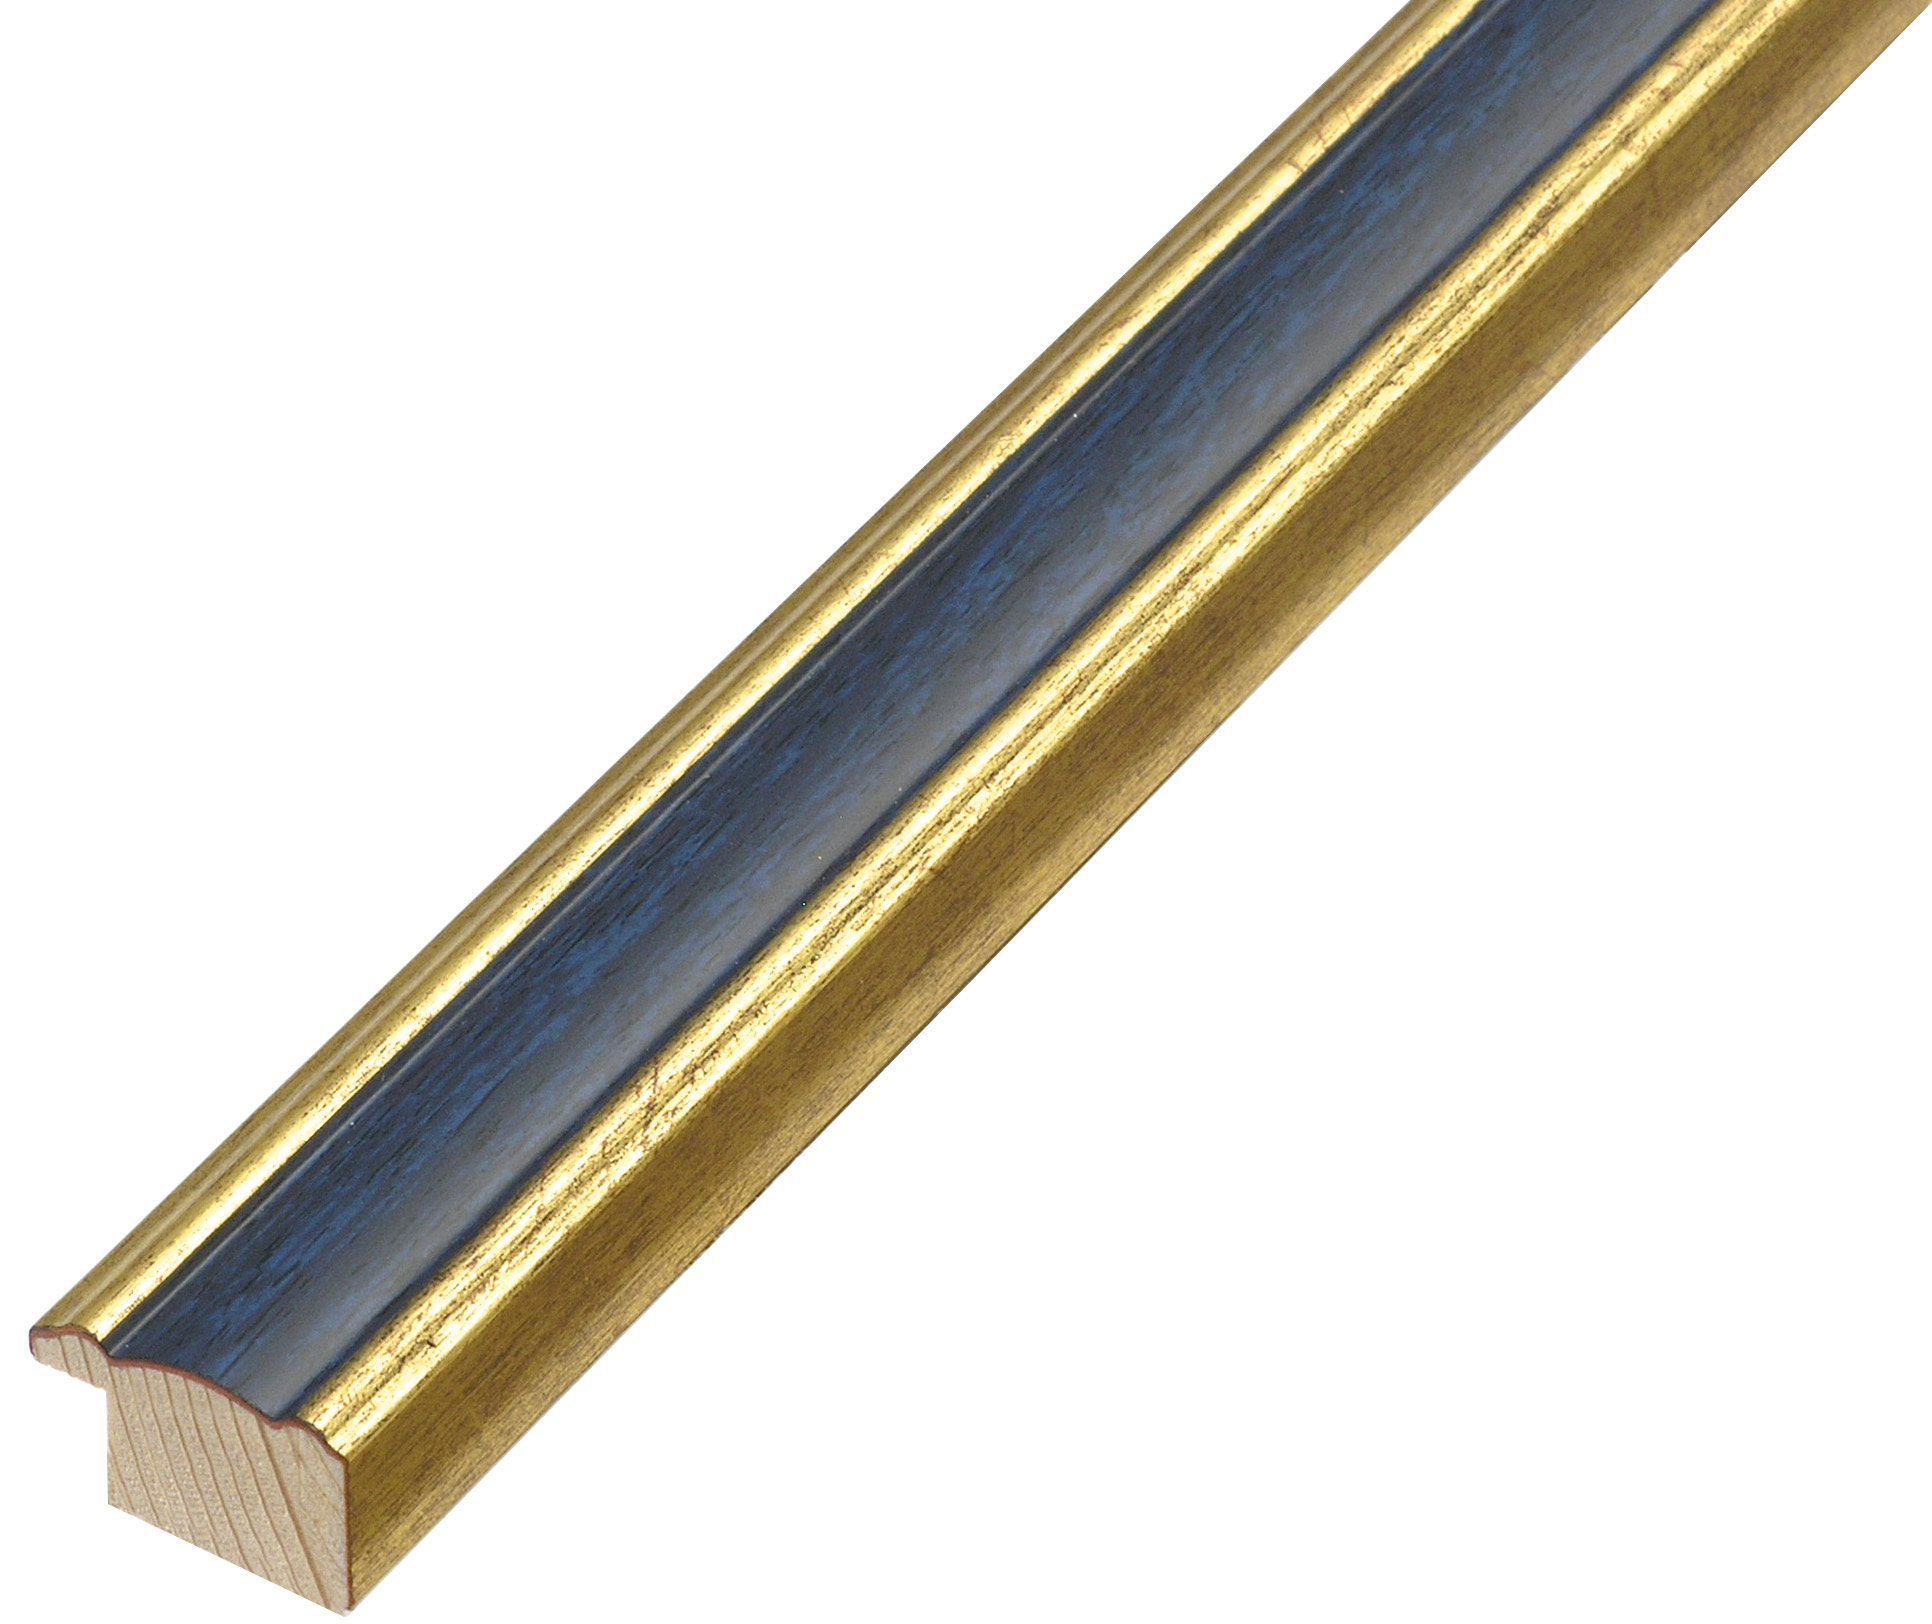 Moulding finger-jointed pine width 24mm - Gold with blue band